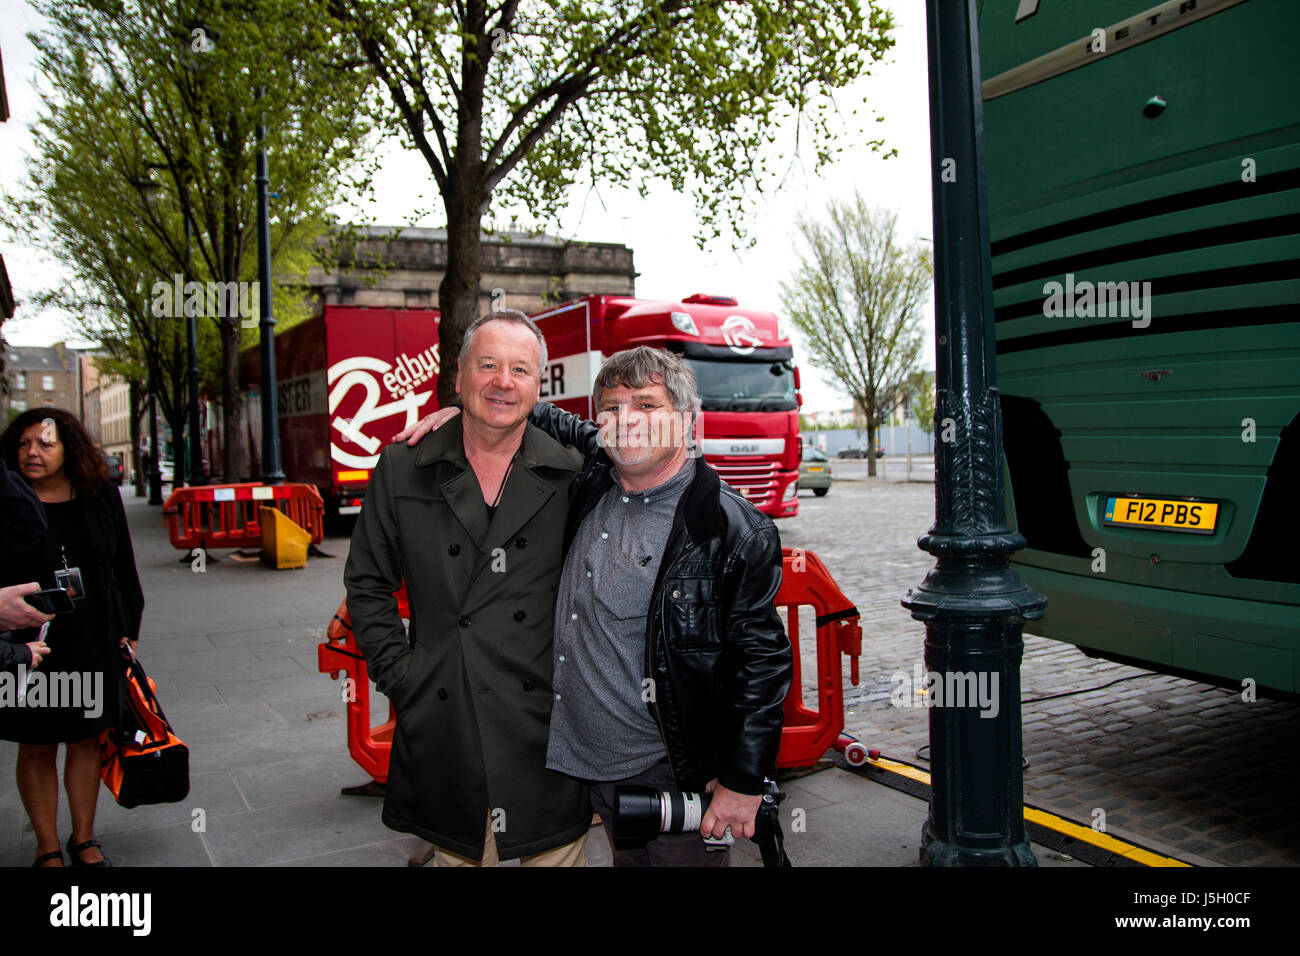 Dundee,Tayside, Scotland, UK. 17th May, 2017. 1980`s rock group Simple Minds arrive in Dundee for the start of their UK tour. Jim Kerr [left] standing outside the Caird Hall Back Stage entrance with local photographer Mr Euan Donegan of Dundee Photographics [right] before the acoustic live concert at 7.30pm today. Credits: Dundee Photographics / Alamy Live News Stock Photo